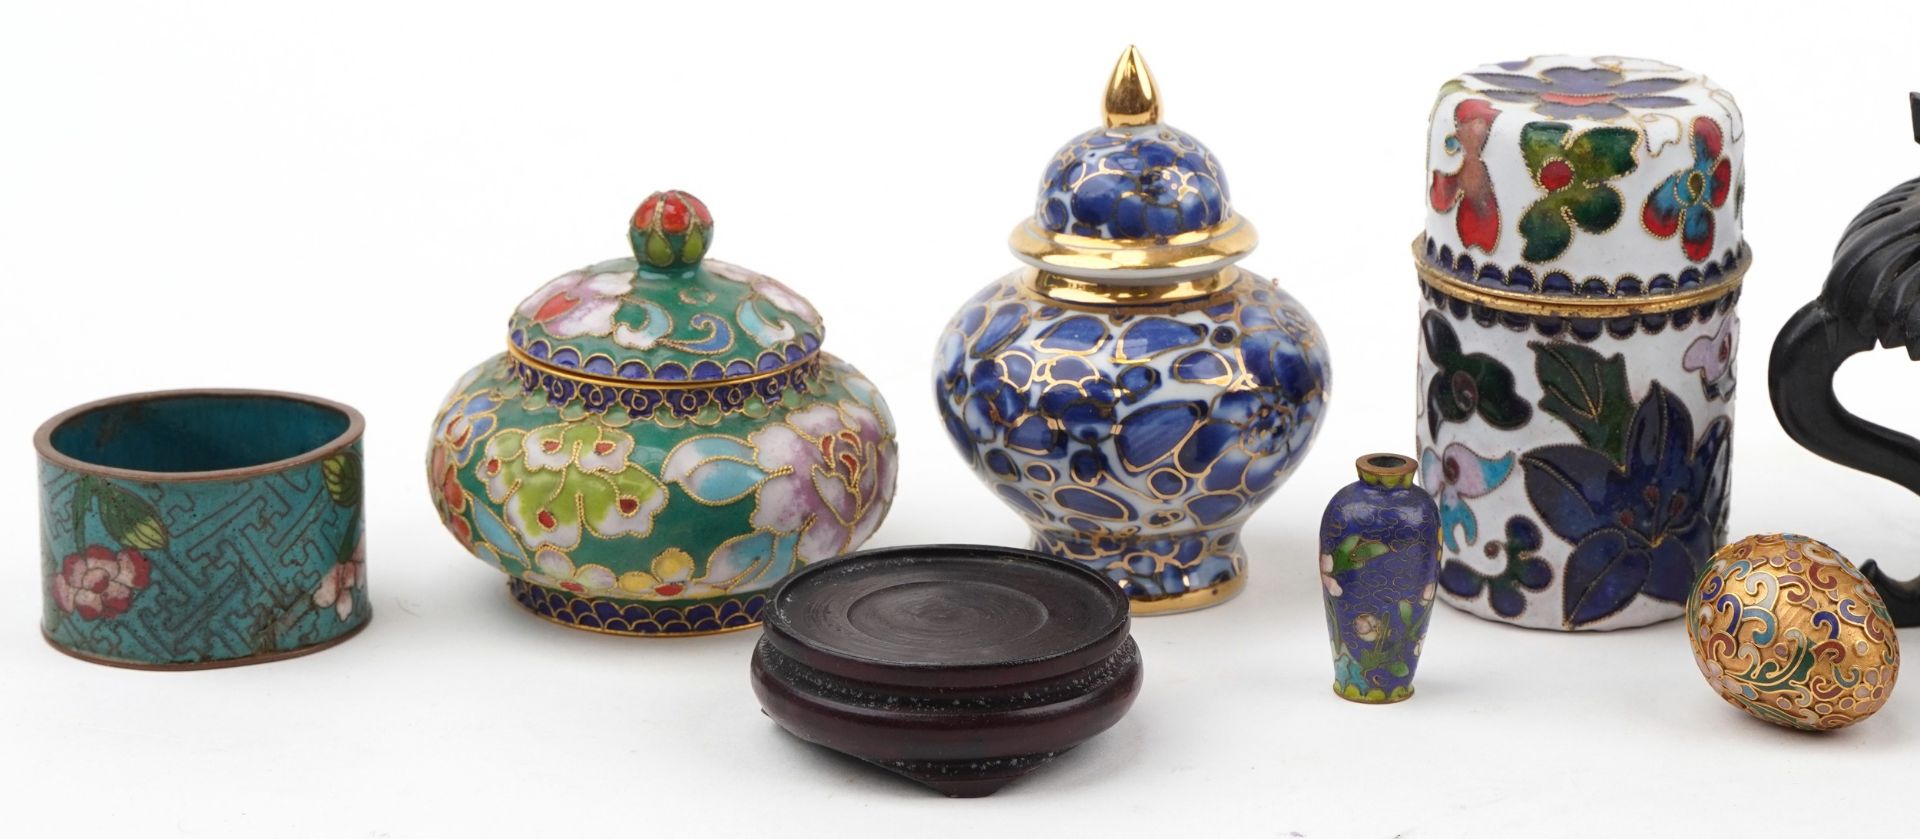 Selection of Chinese items including hand painted porcelain bowl, wooden stands, cloisonne pots - Image 2 of 4